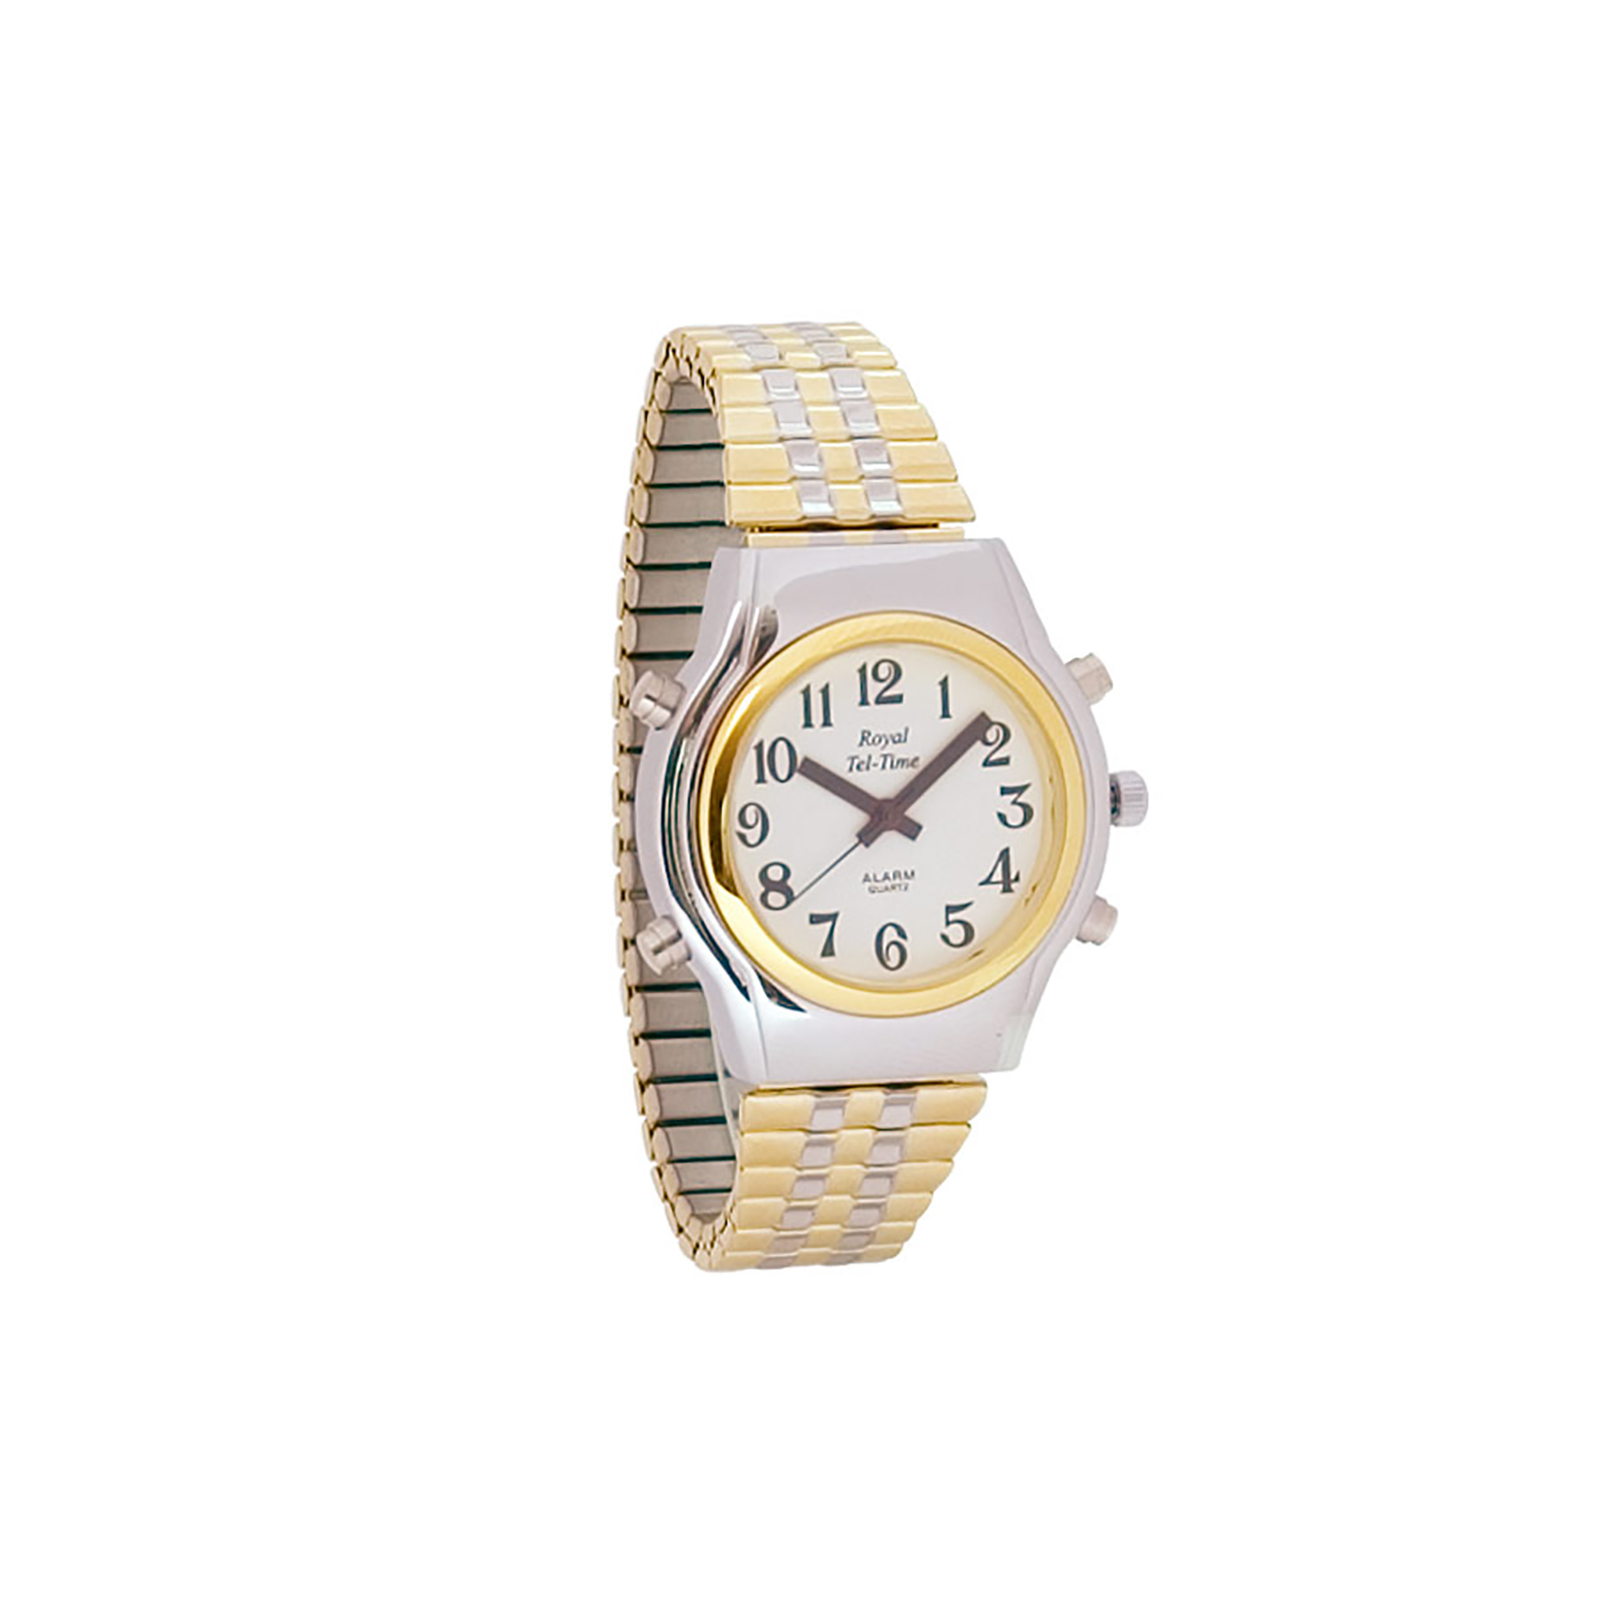 Royal Tel-Time Men's Spanish Talking Watch - Gold and Silver